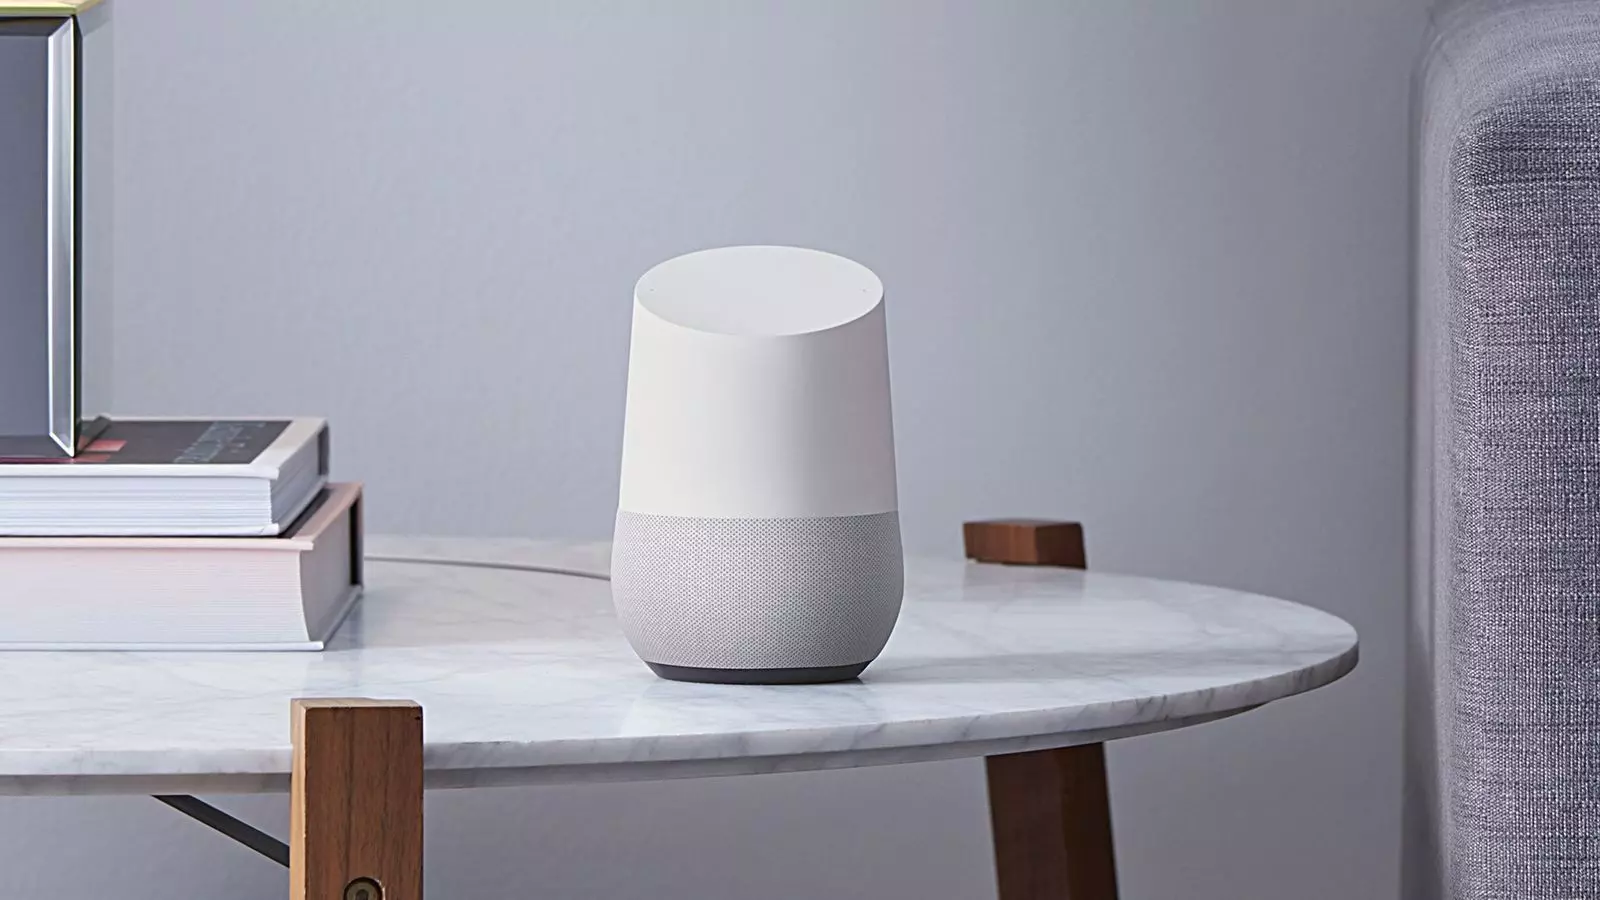 How to set up and edit voice commands in Google Home